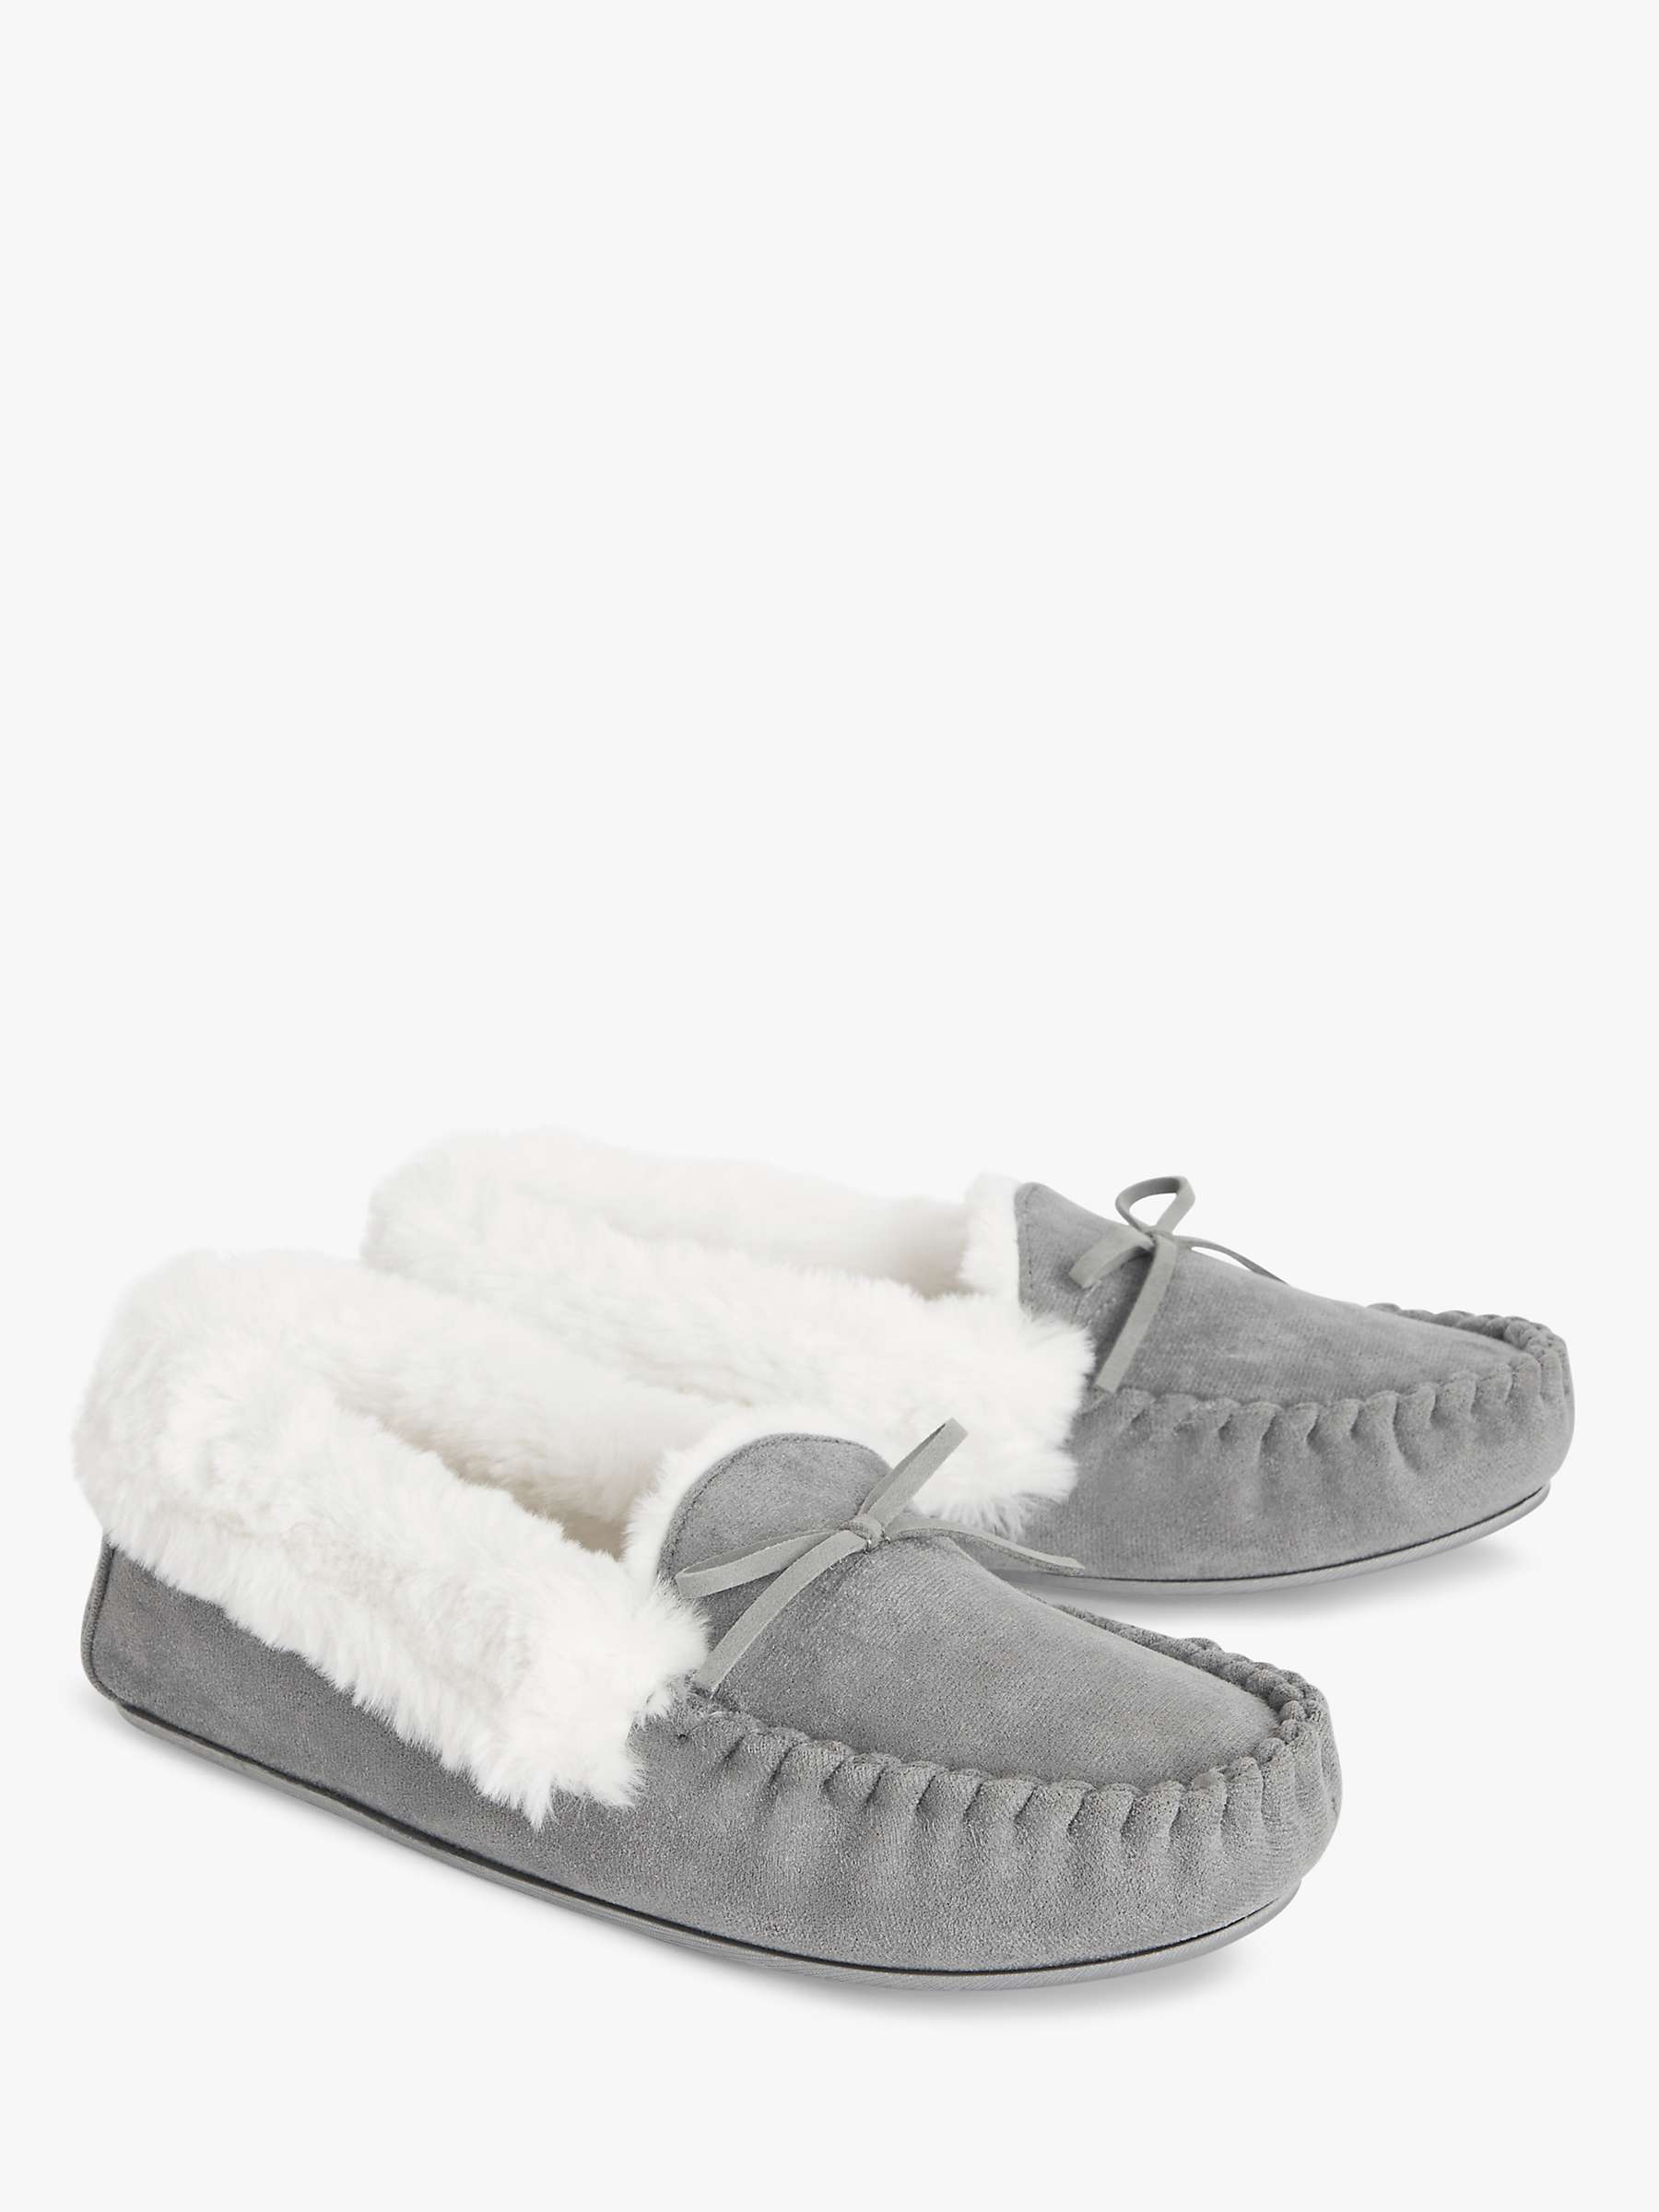 Buy John Lewis ANYDAY Microsuede Faux Fur Moccasin Slippers, Grey Online at johnlewis.com